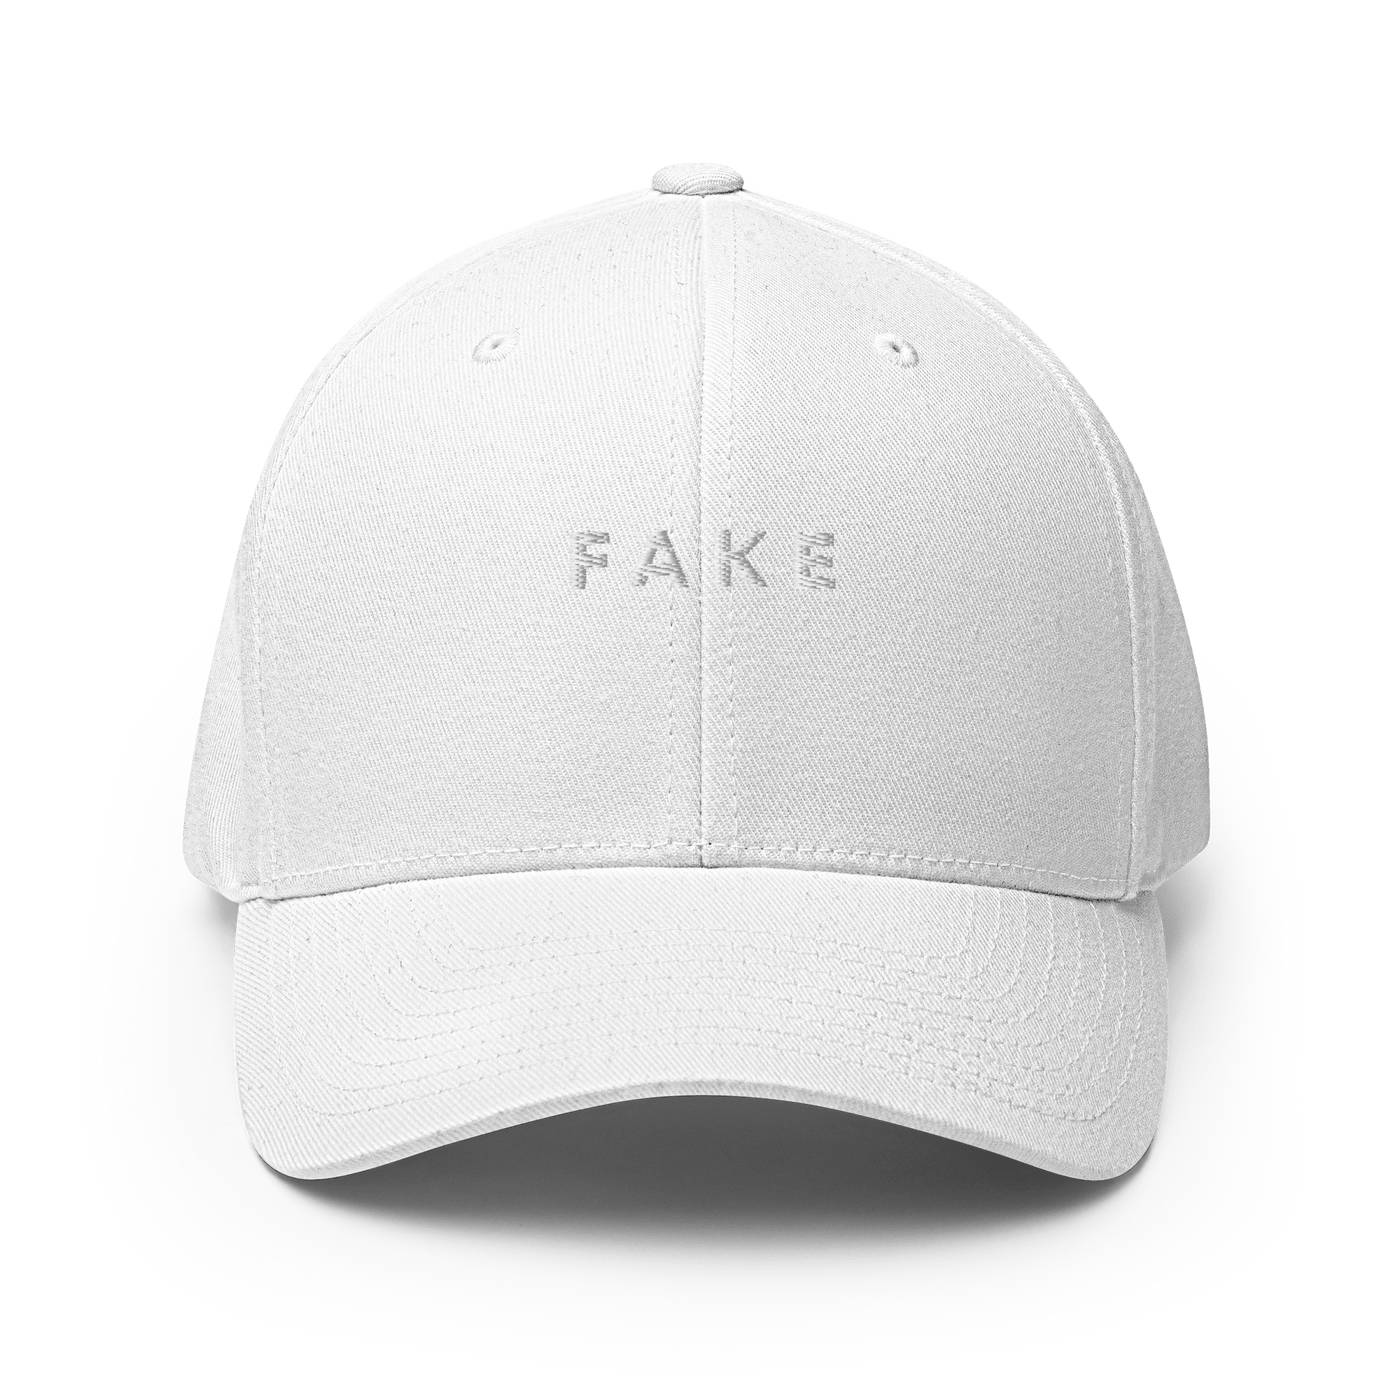 FAKE Flexfit Cap - White - S/M - Just Another Cap Store